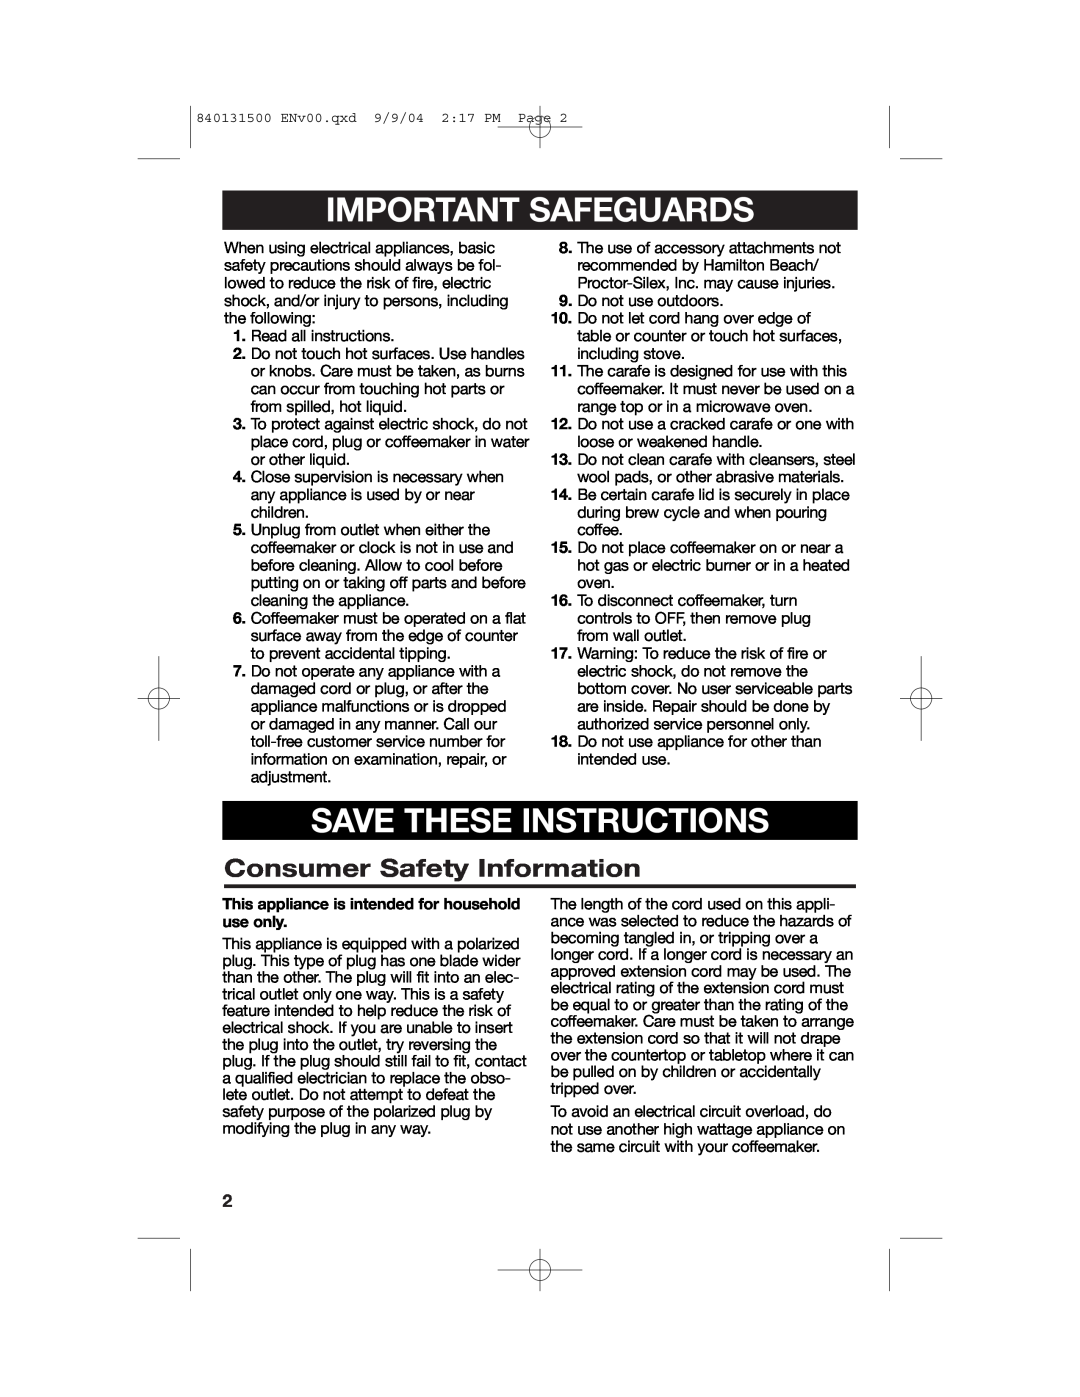 Hamilton Beach Stay or Go Coffeemaker manual Important Safeguards, Save These Instructions, Consumer Safety Information 